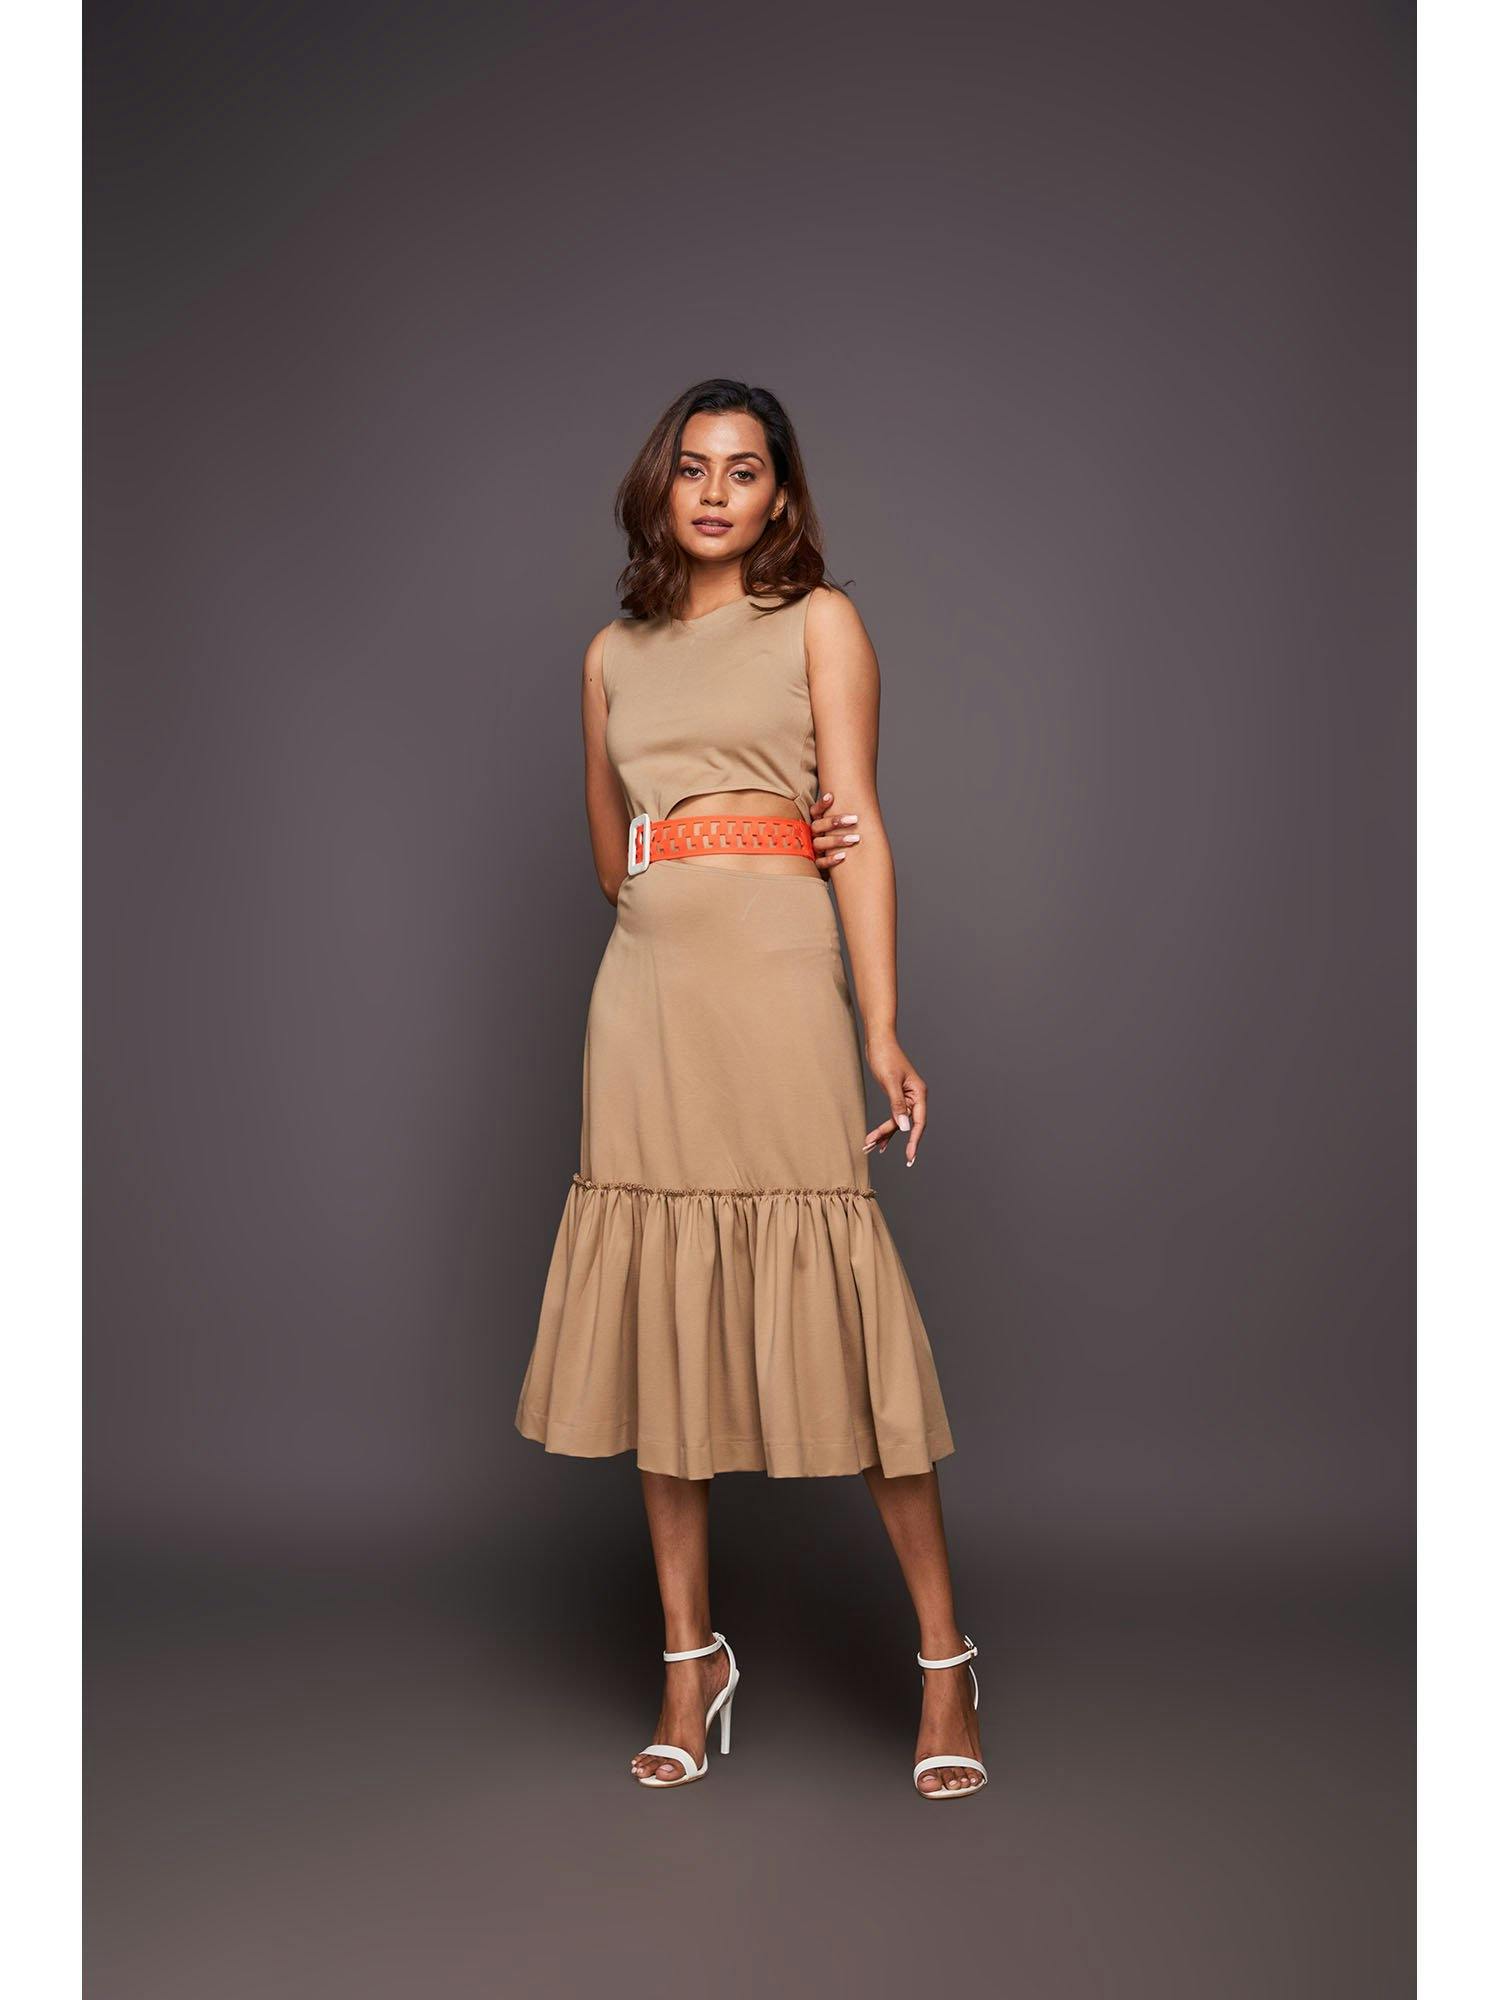 beige dress with gathered bottom and belt, a product by Deepika Arora